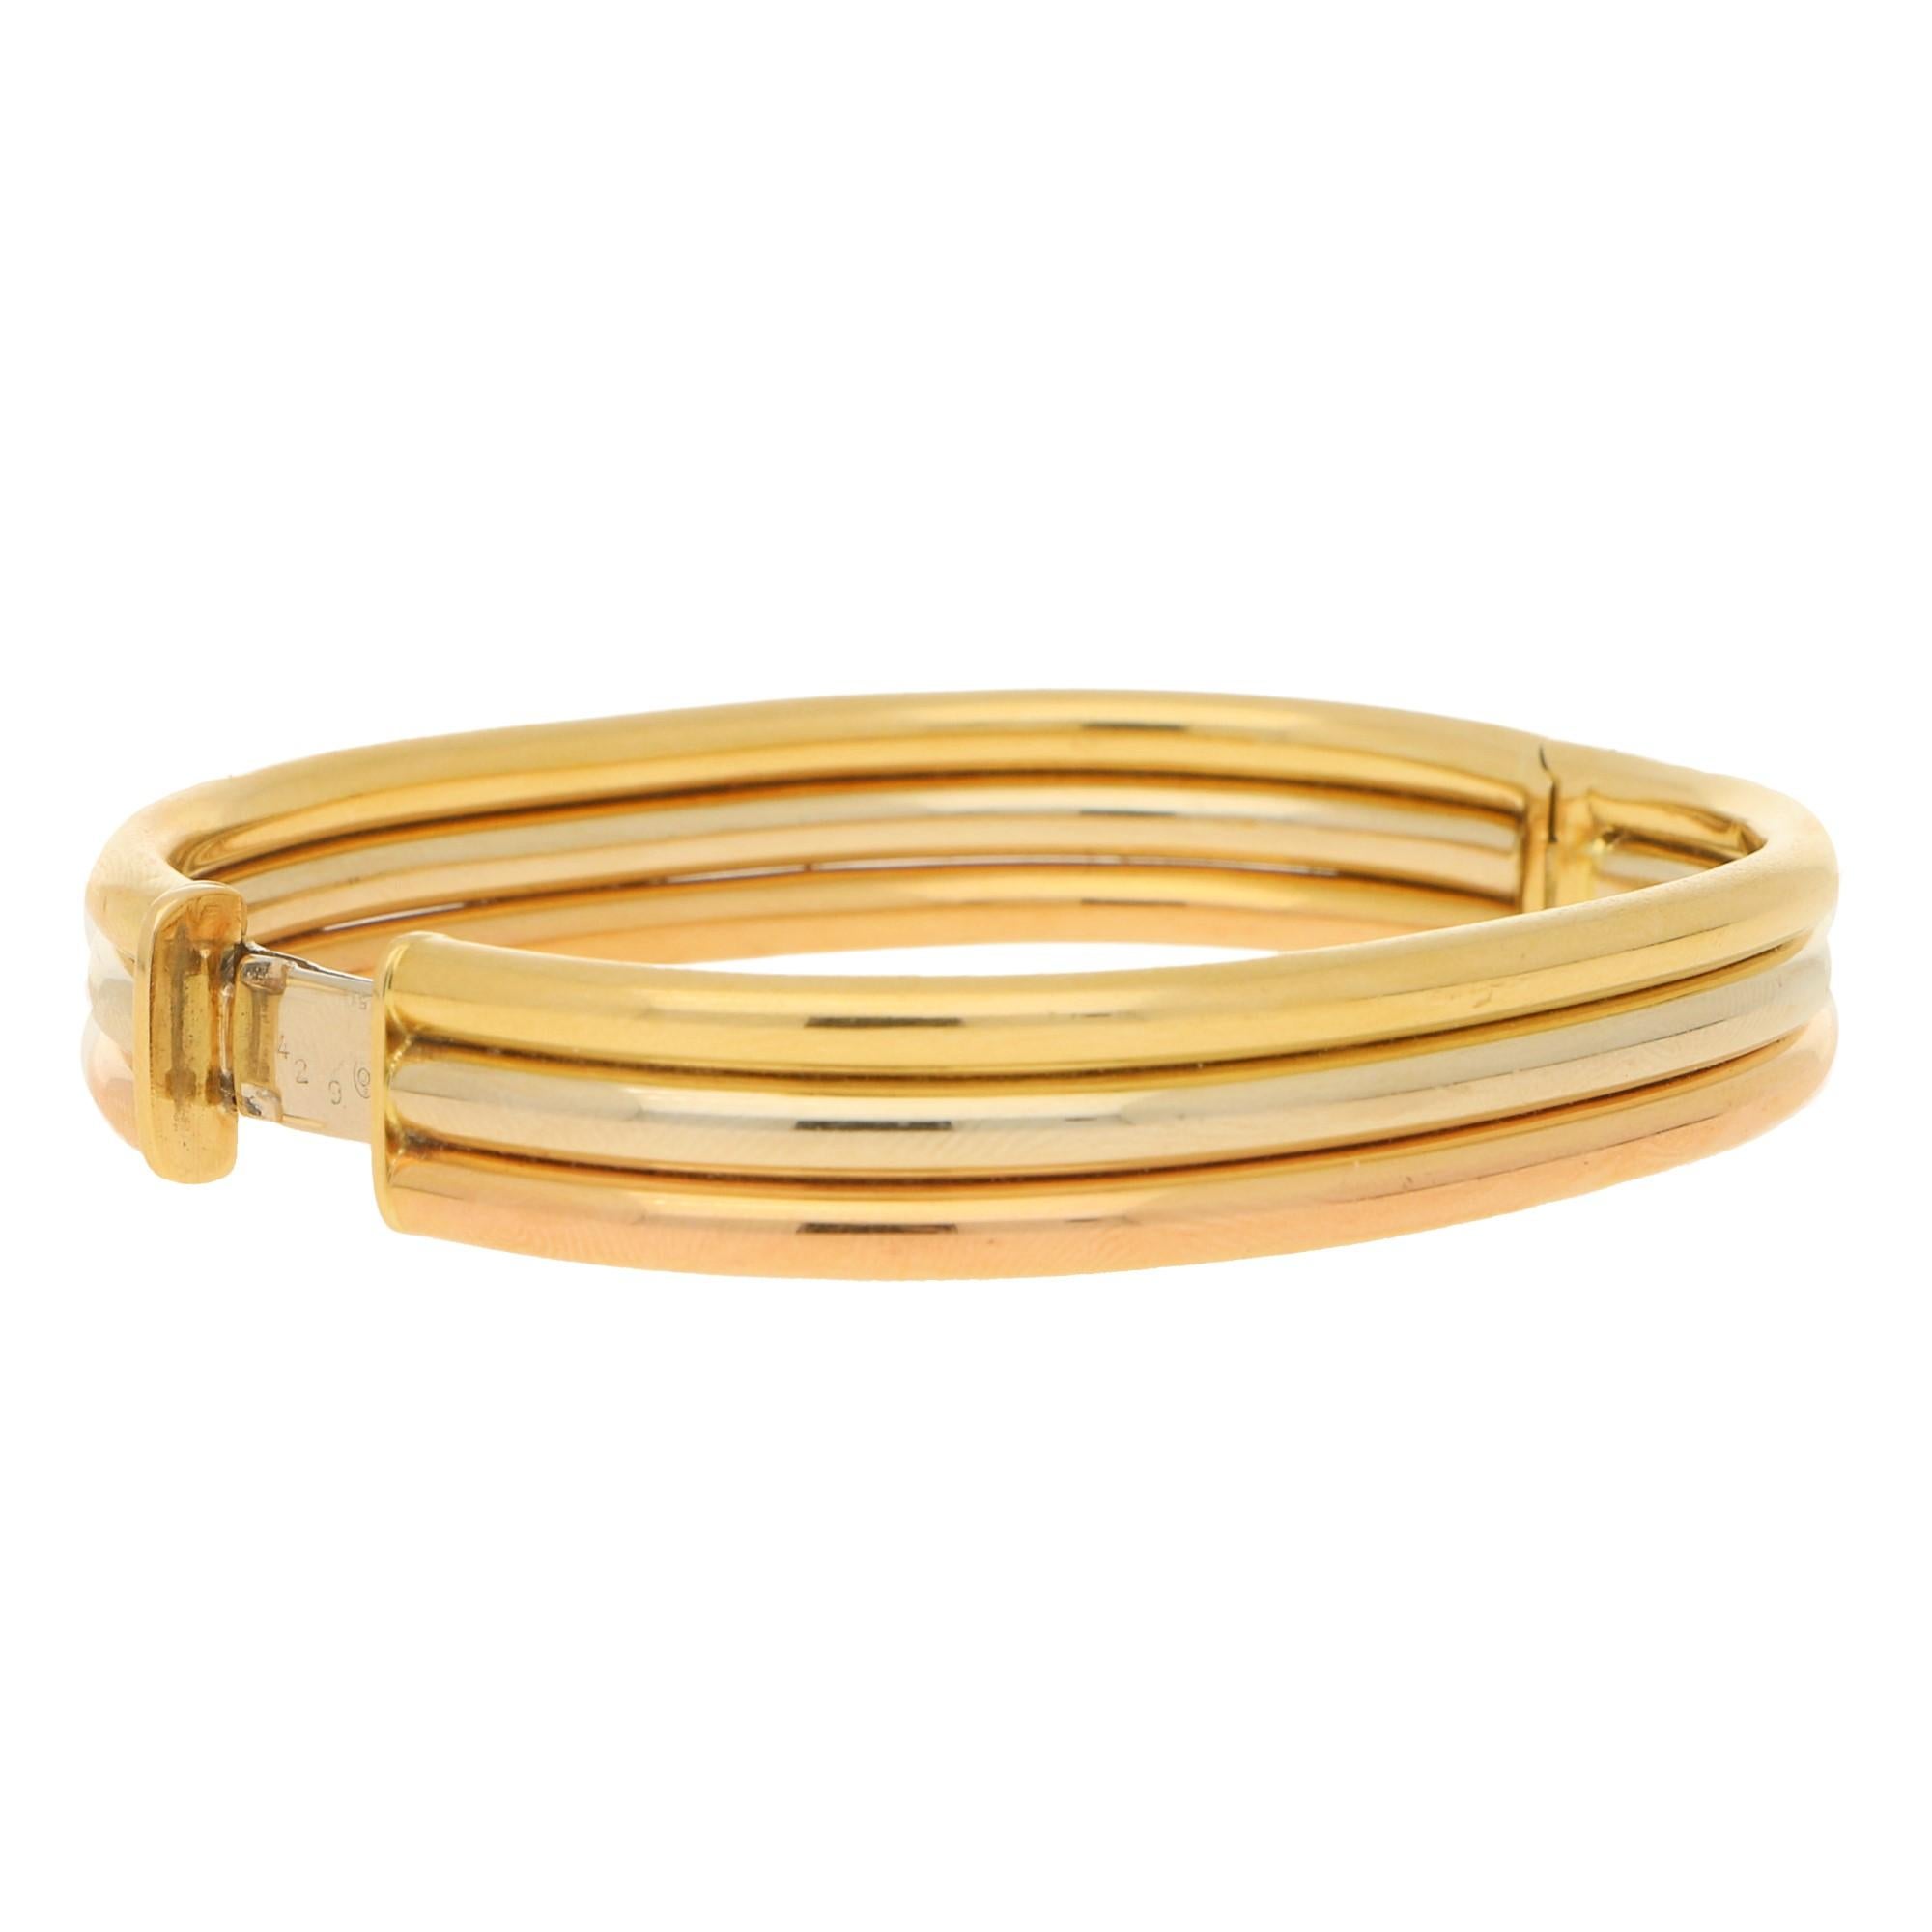 A classic vintage Cartier trinity bangle crafted in 18k yellow, rose and white gold. Because the bracelet is designed to be solid instead of the typical trinity design, once on, we see these lovely grooves in the bracelet which has a beautiful